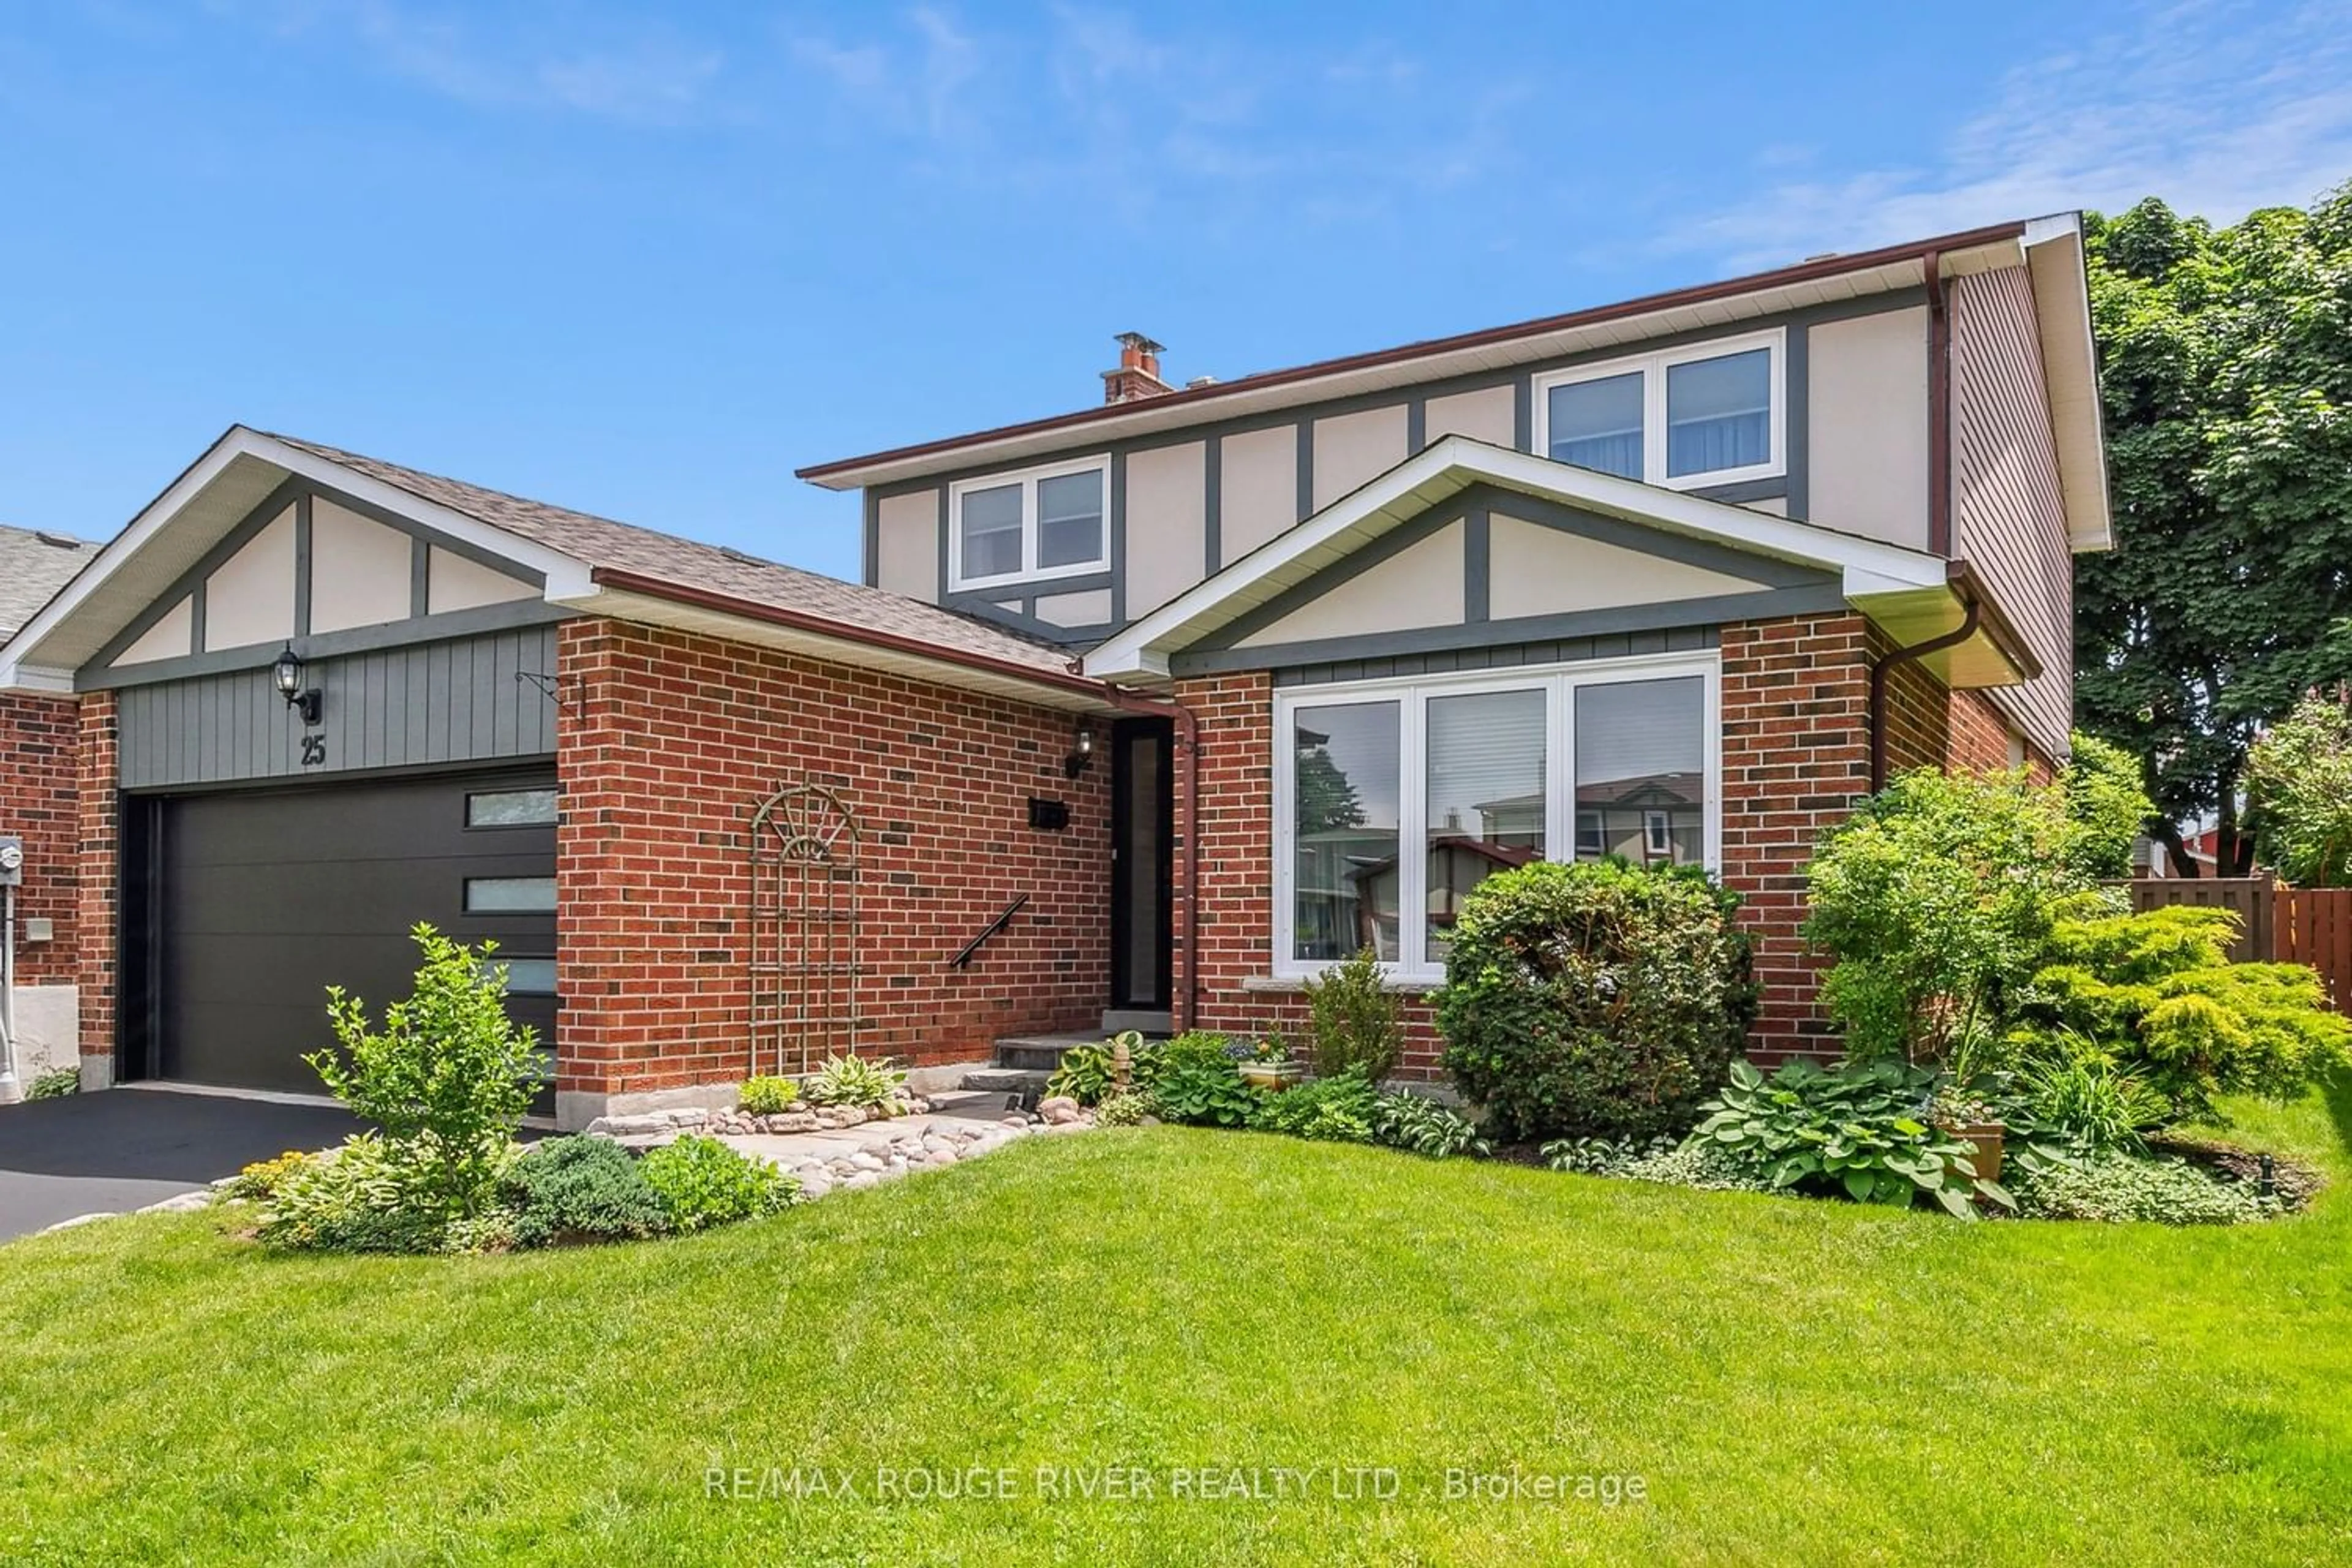 Home with brick exterior material for 25 Fireside Dr, Toronto Ontario M1B 2C9